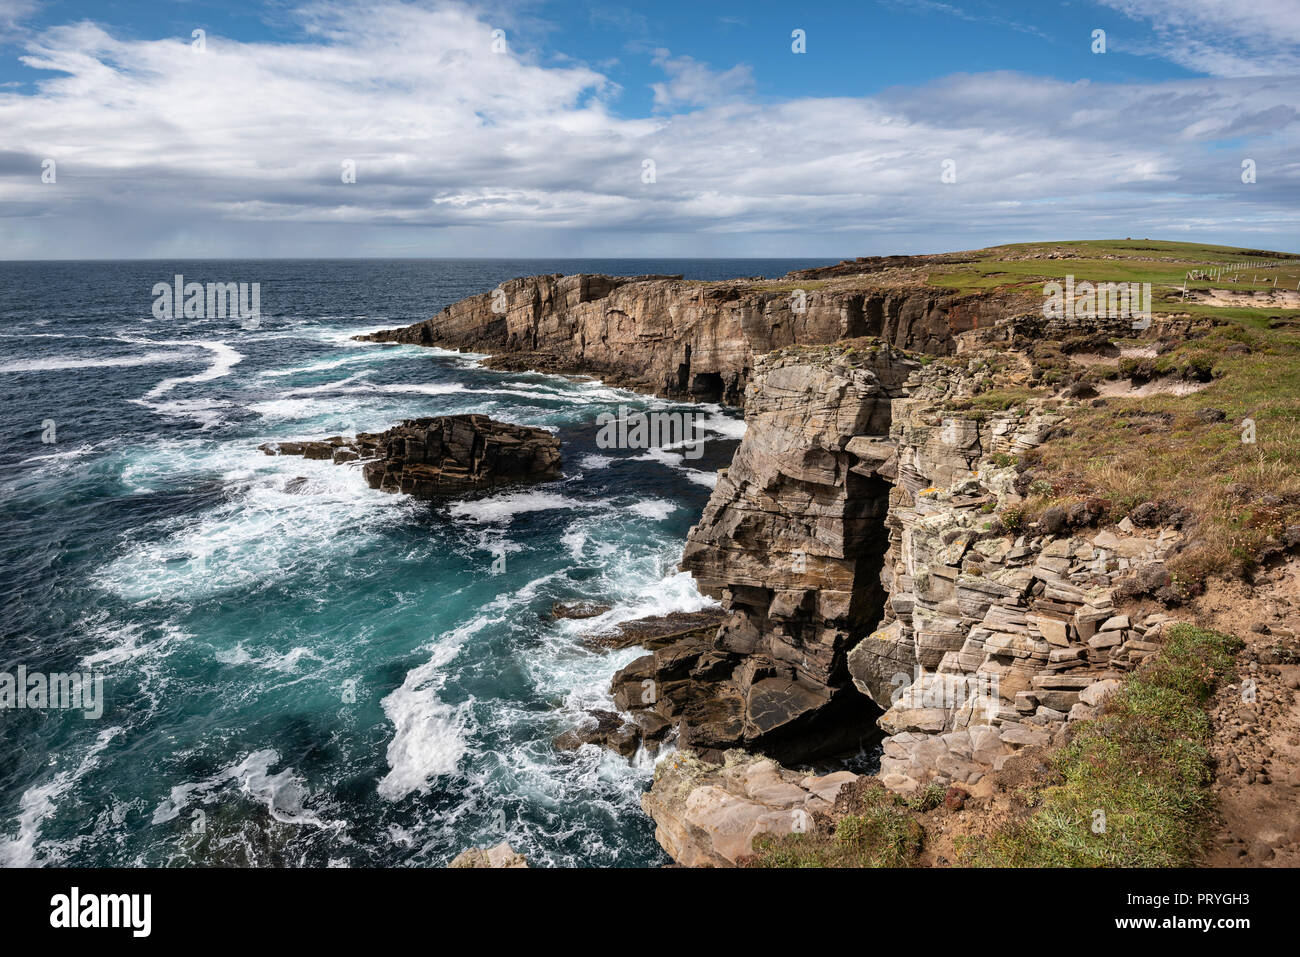 Cliffs of Yesnaby, Sandwick, Mainland, Orkney Islands, Scotland, Great Britain Stock Photo